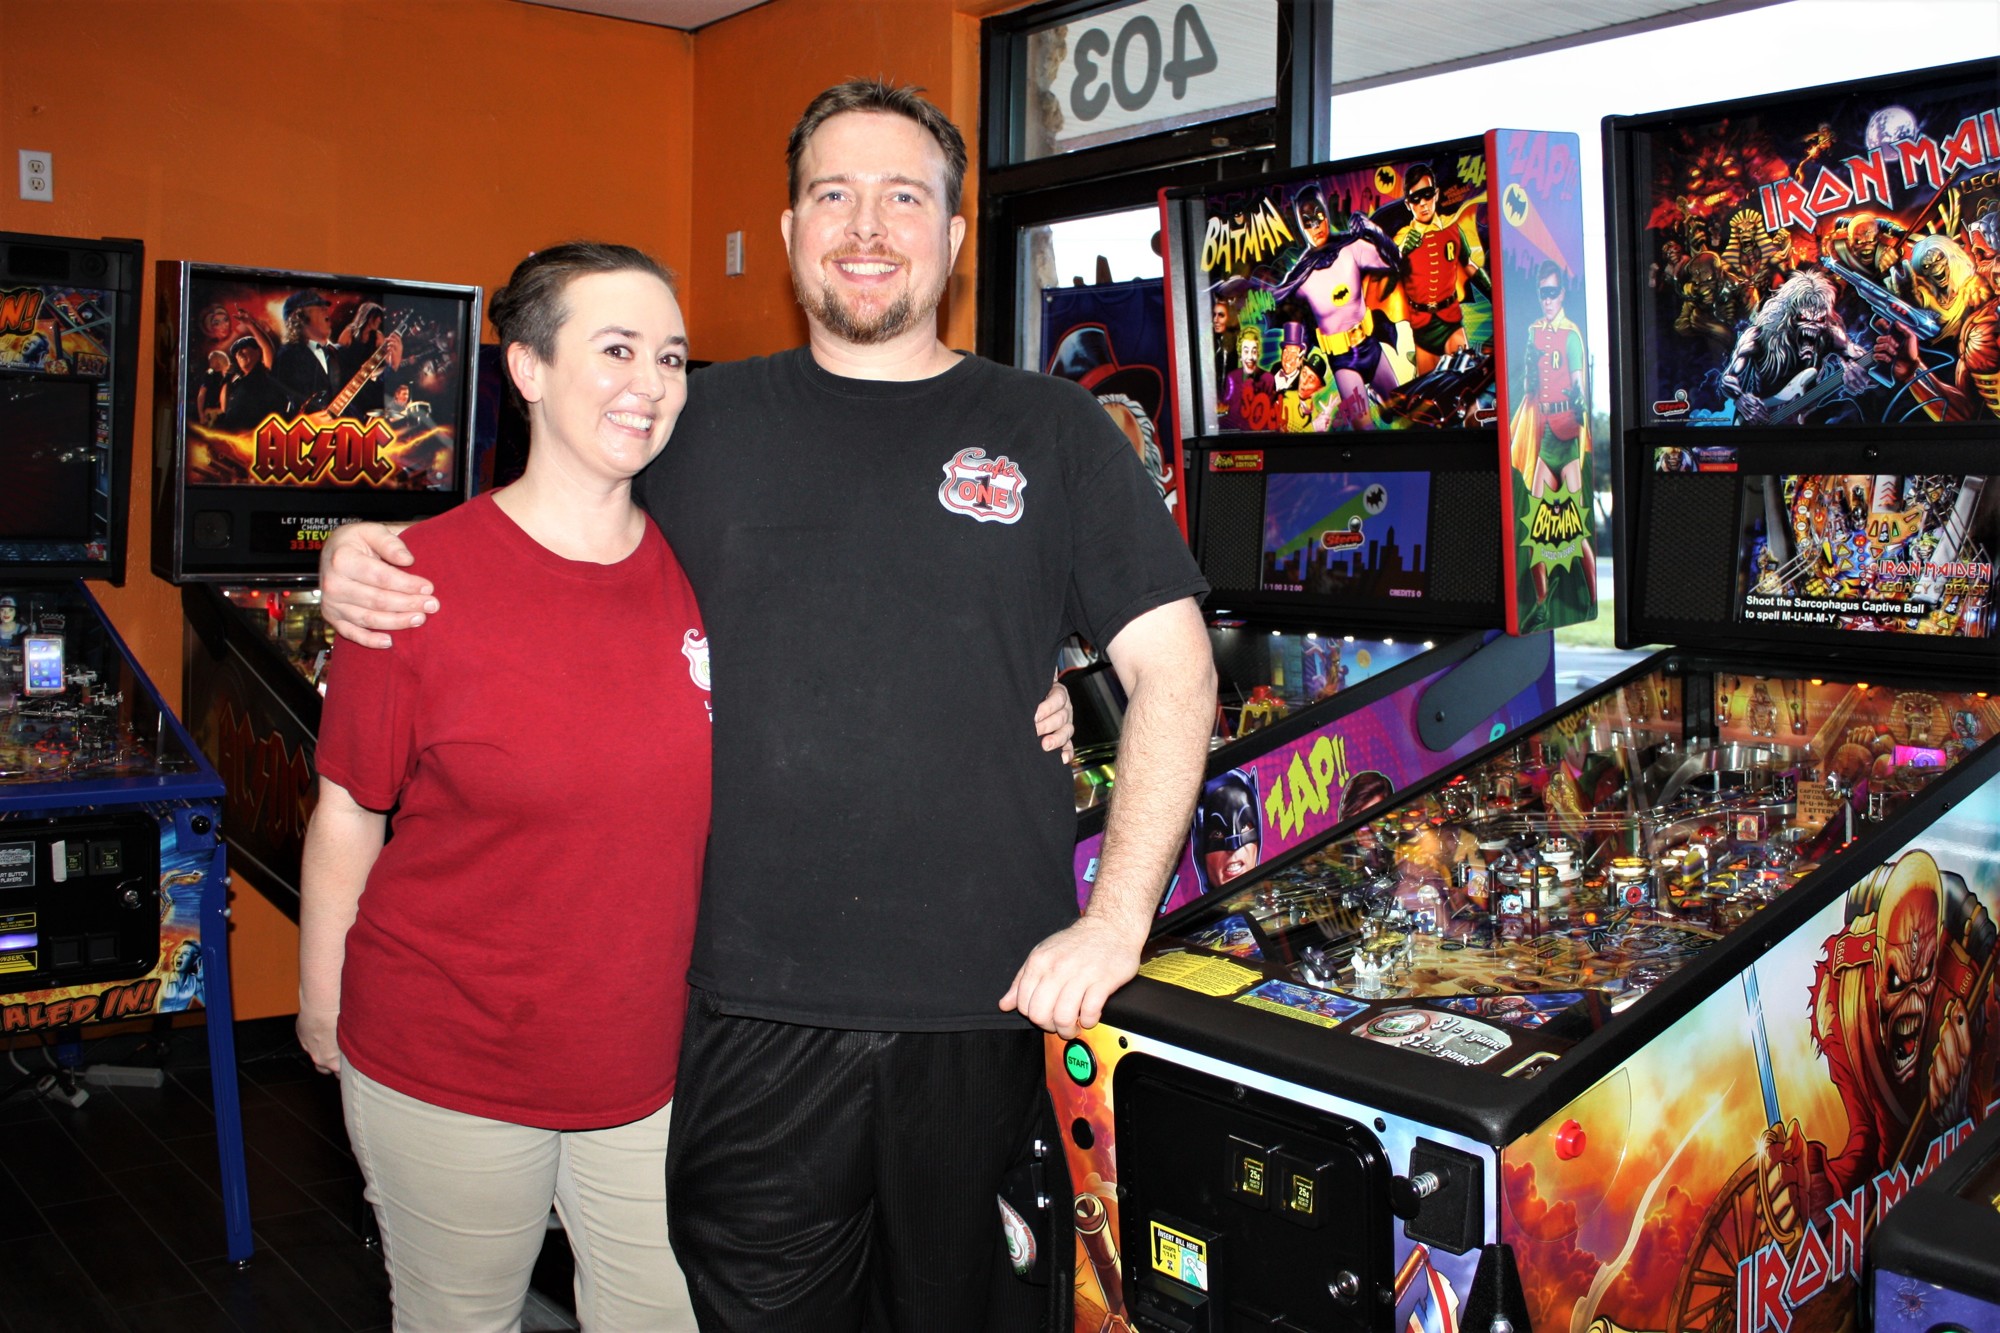 Sanya and Karl Strode offer pinball at their restaurant, Café One. Photo by Wayne Grant